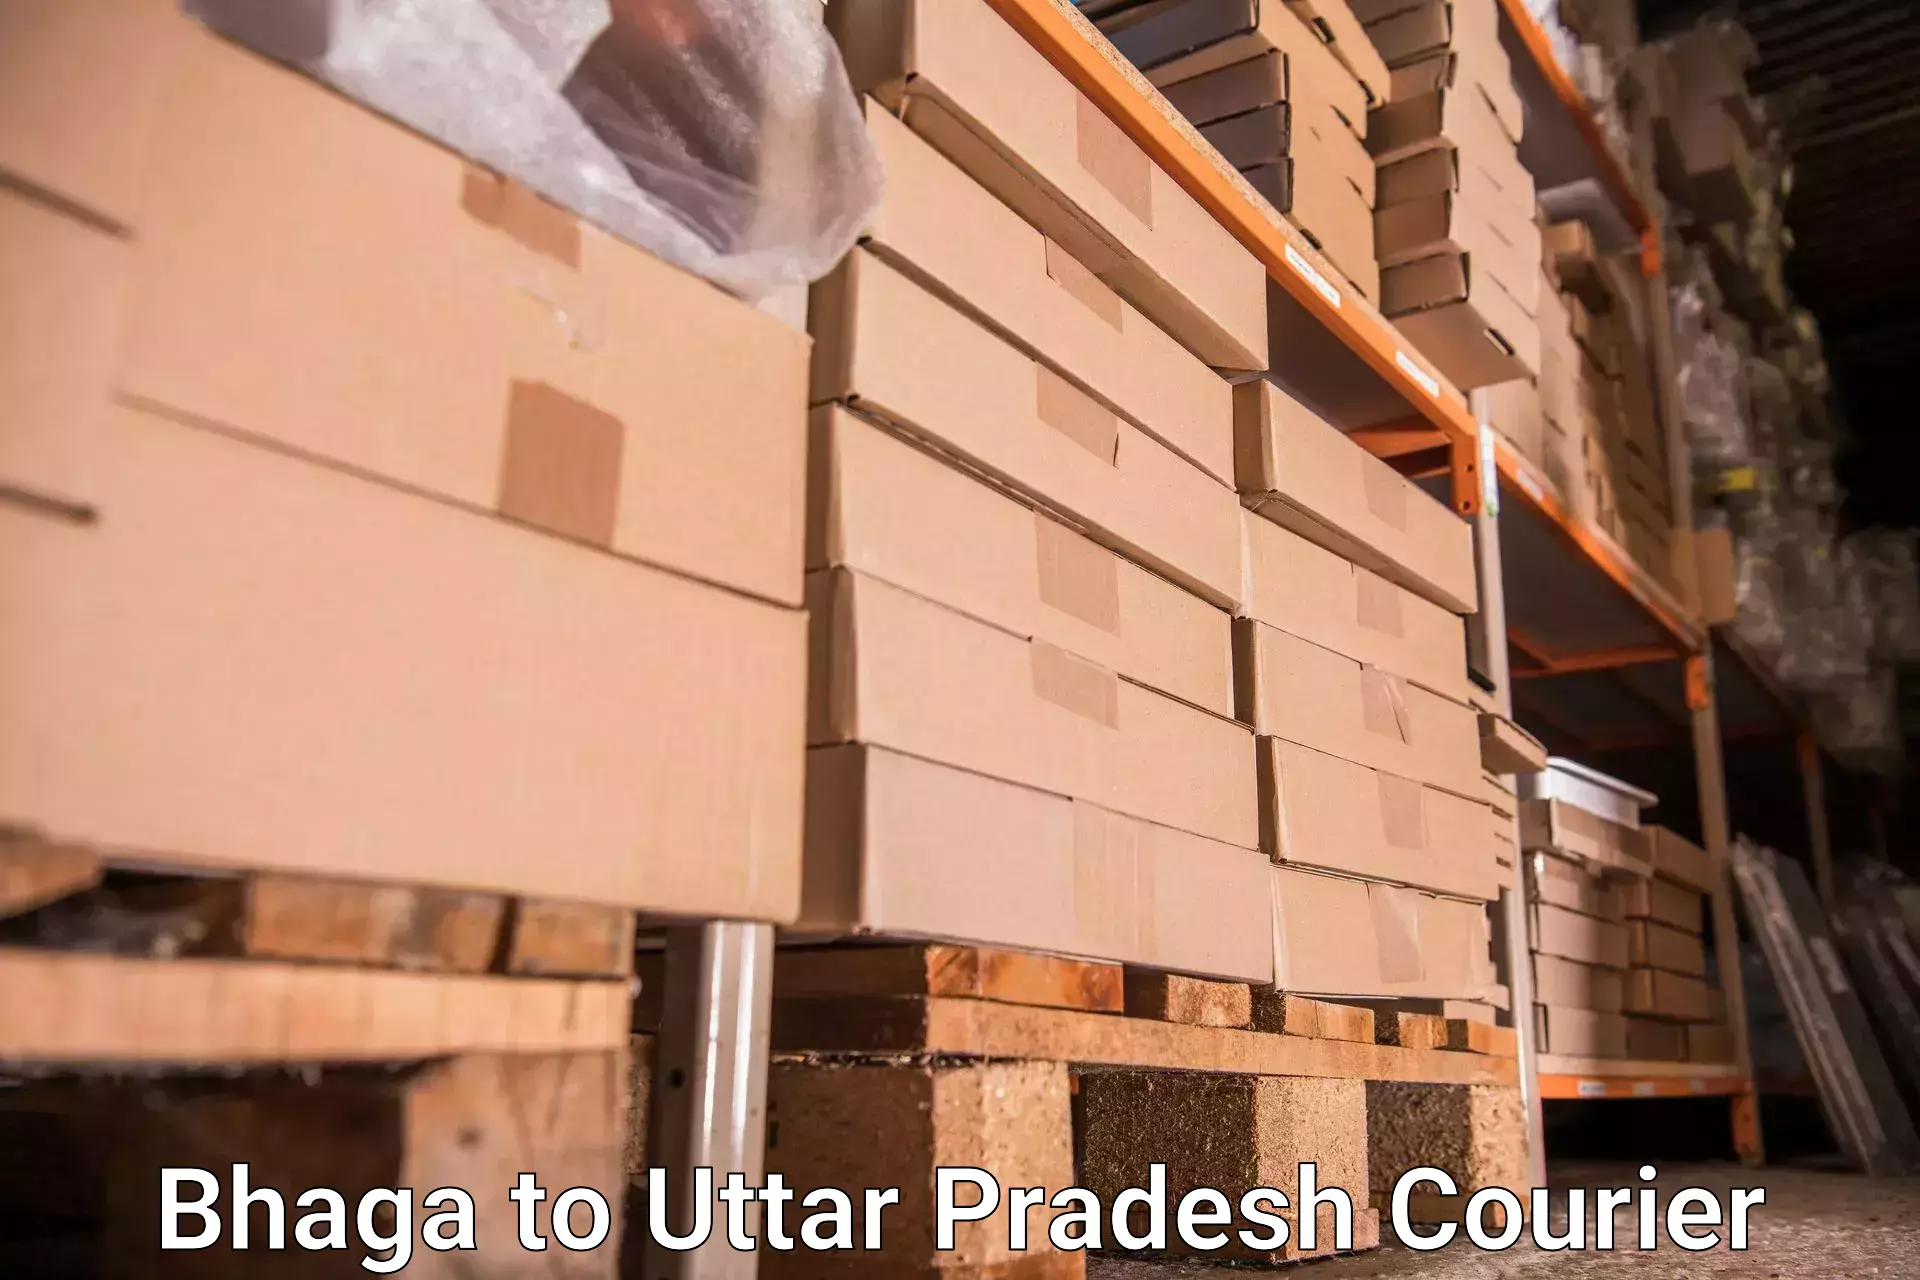 Personal effects shipping Bhaga to Allahabad